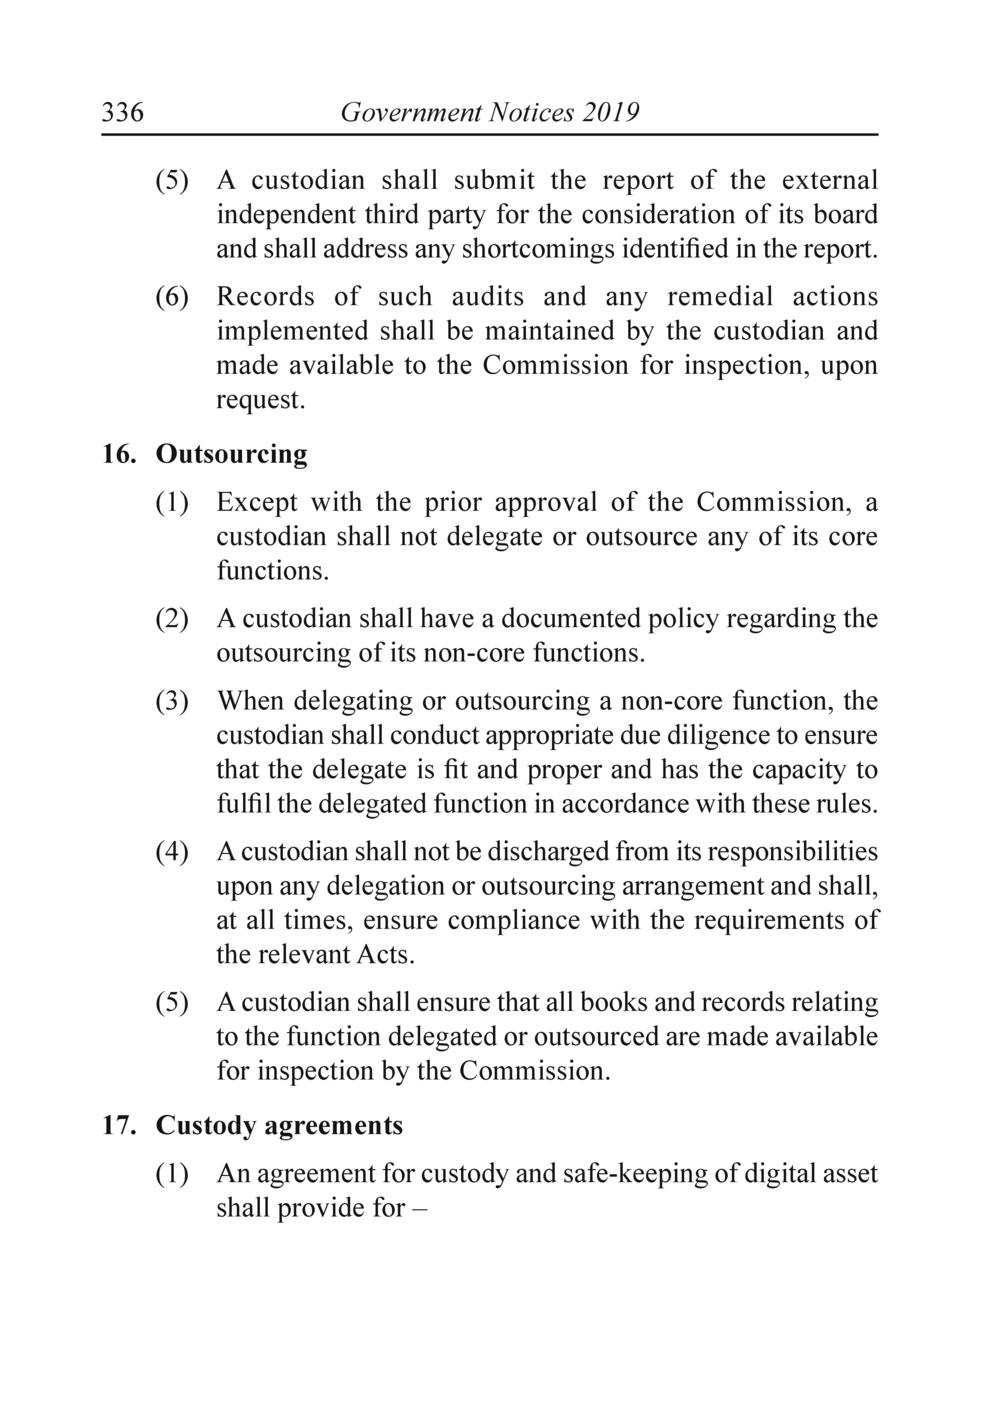 The Financial Services Custodian services digital asset Rules 2019